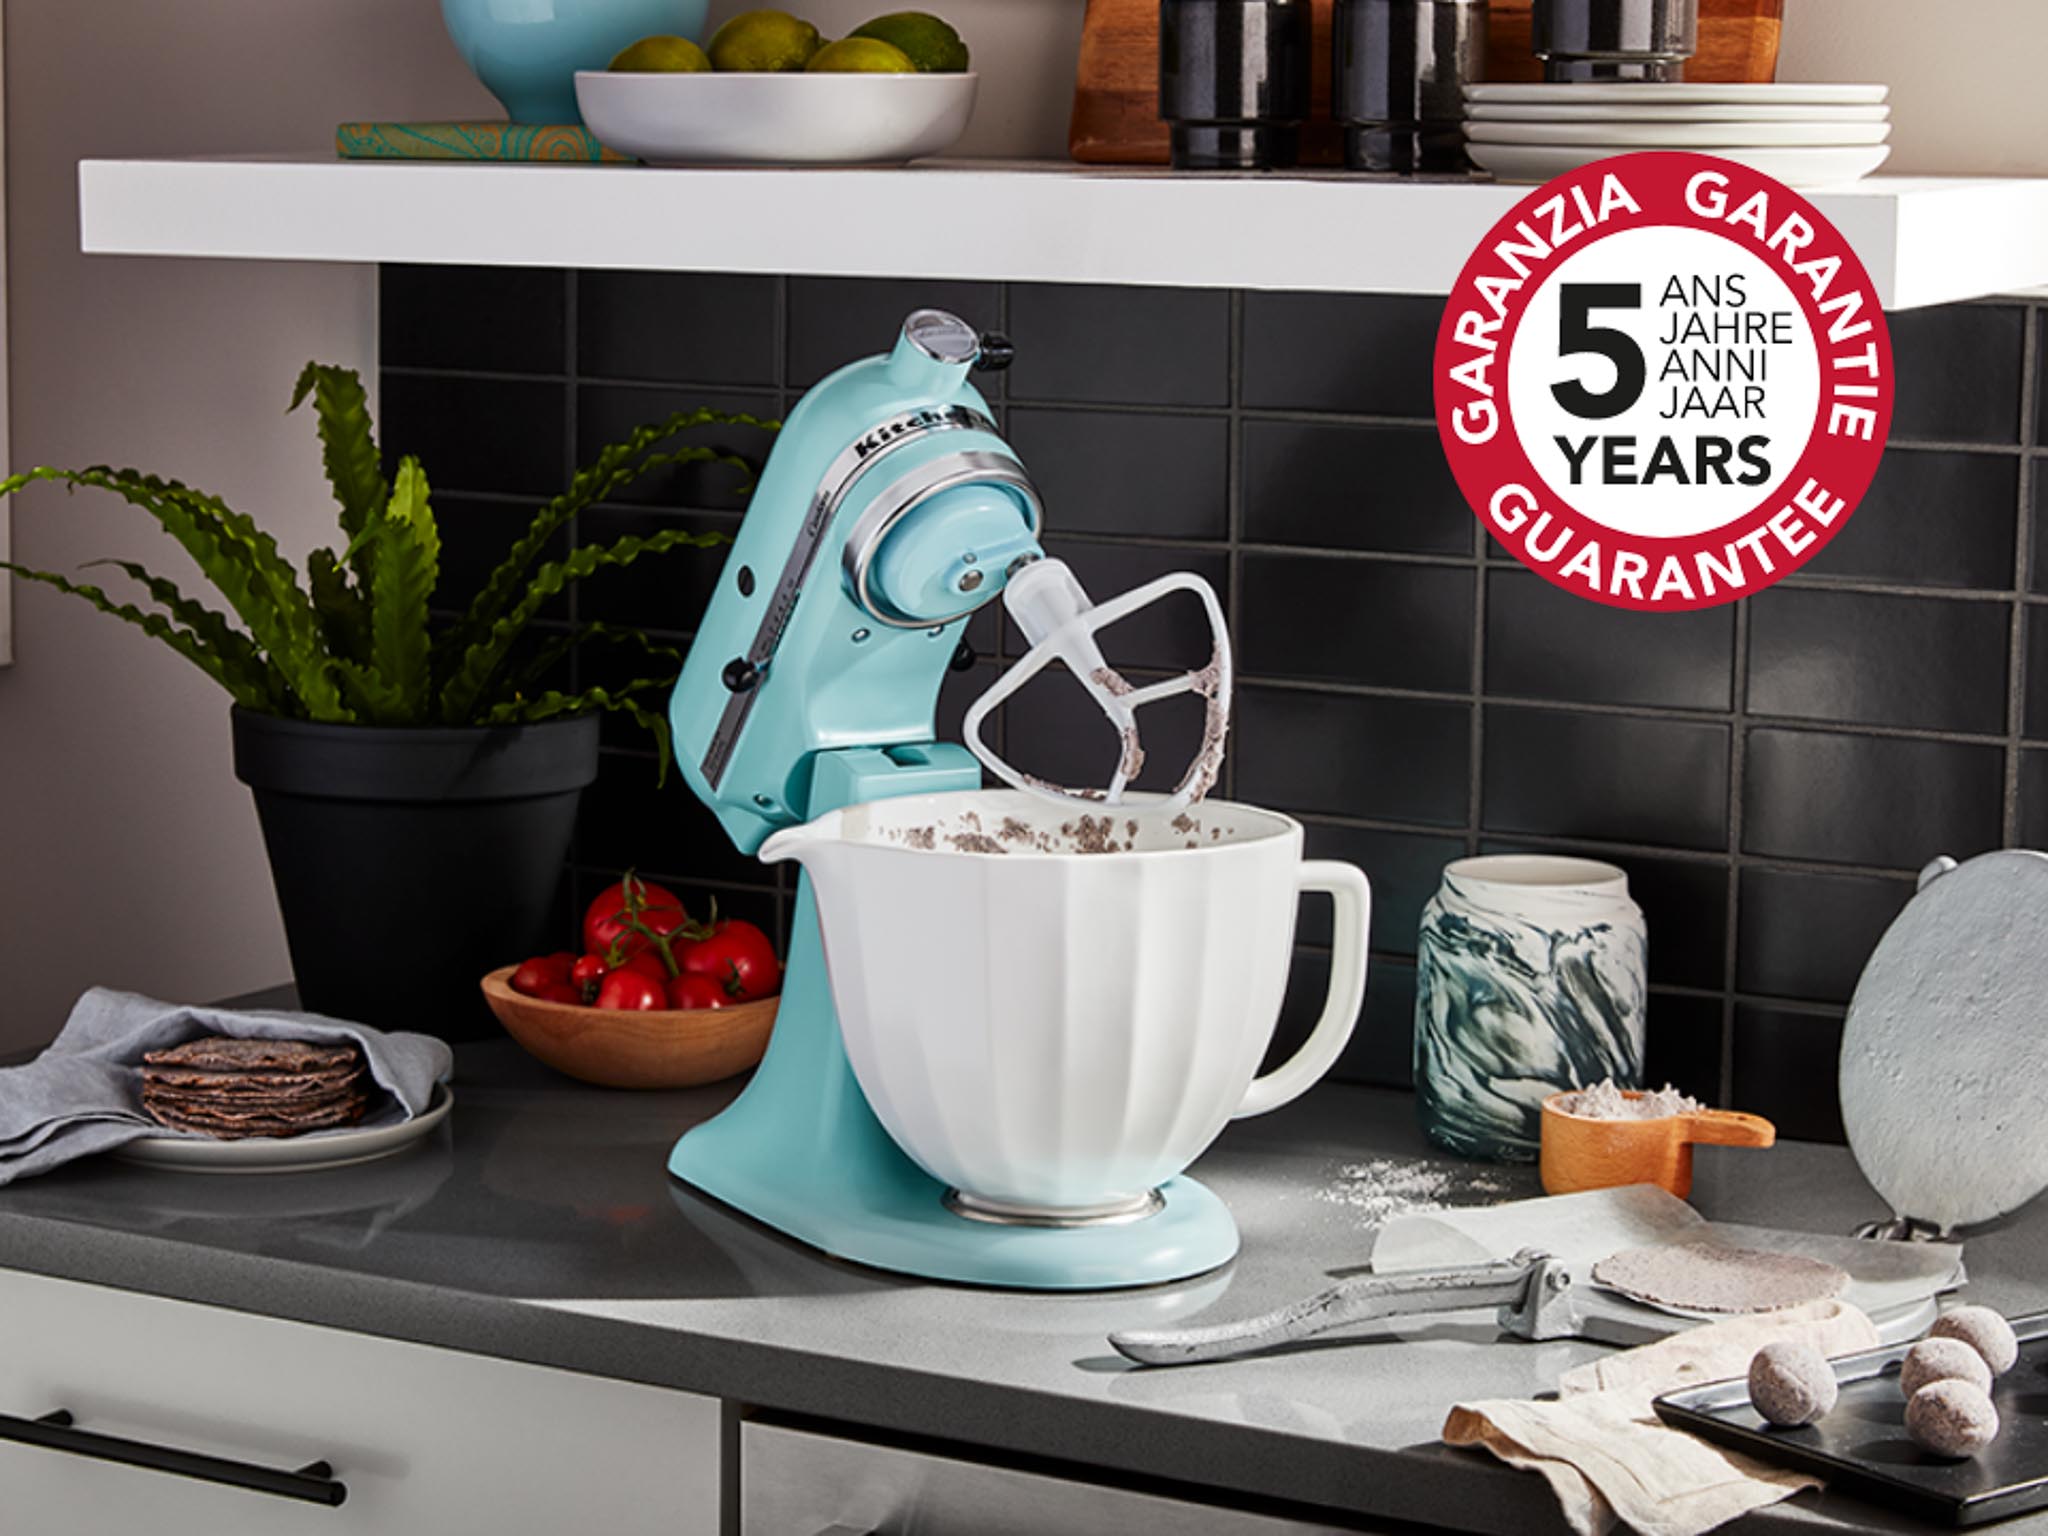 Accessories-ceramic-bowl-white shell 5 year guarantee mixer with bowl on the kitchen table